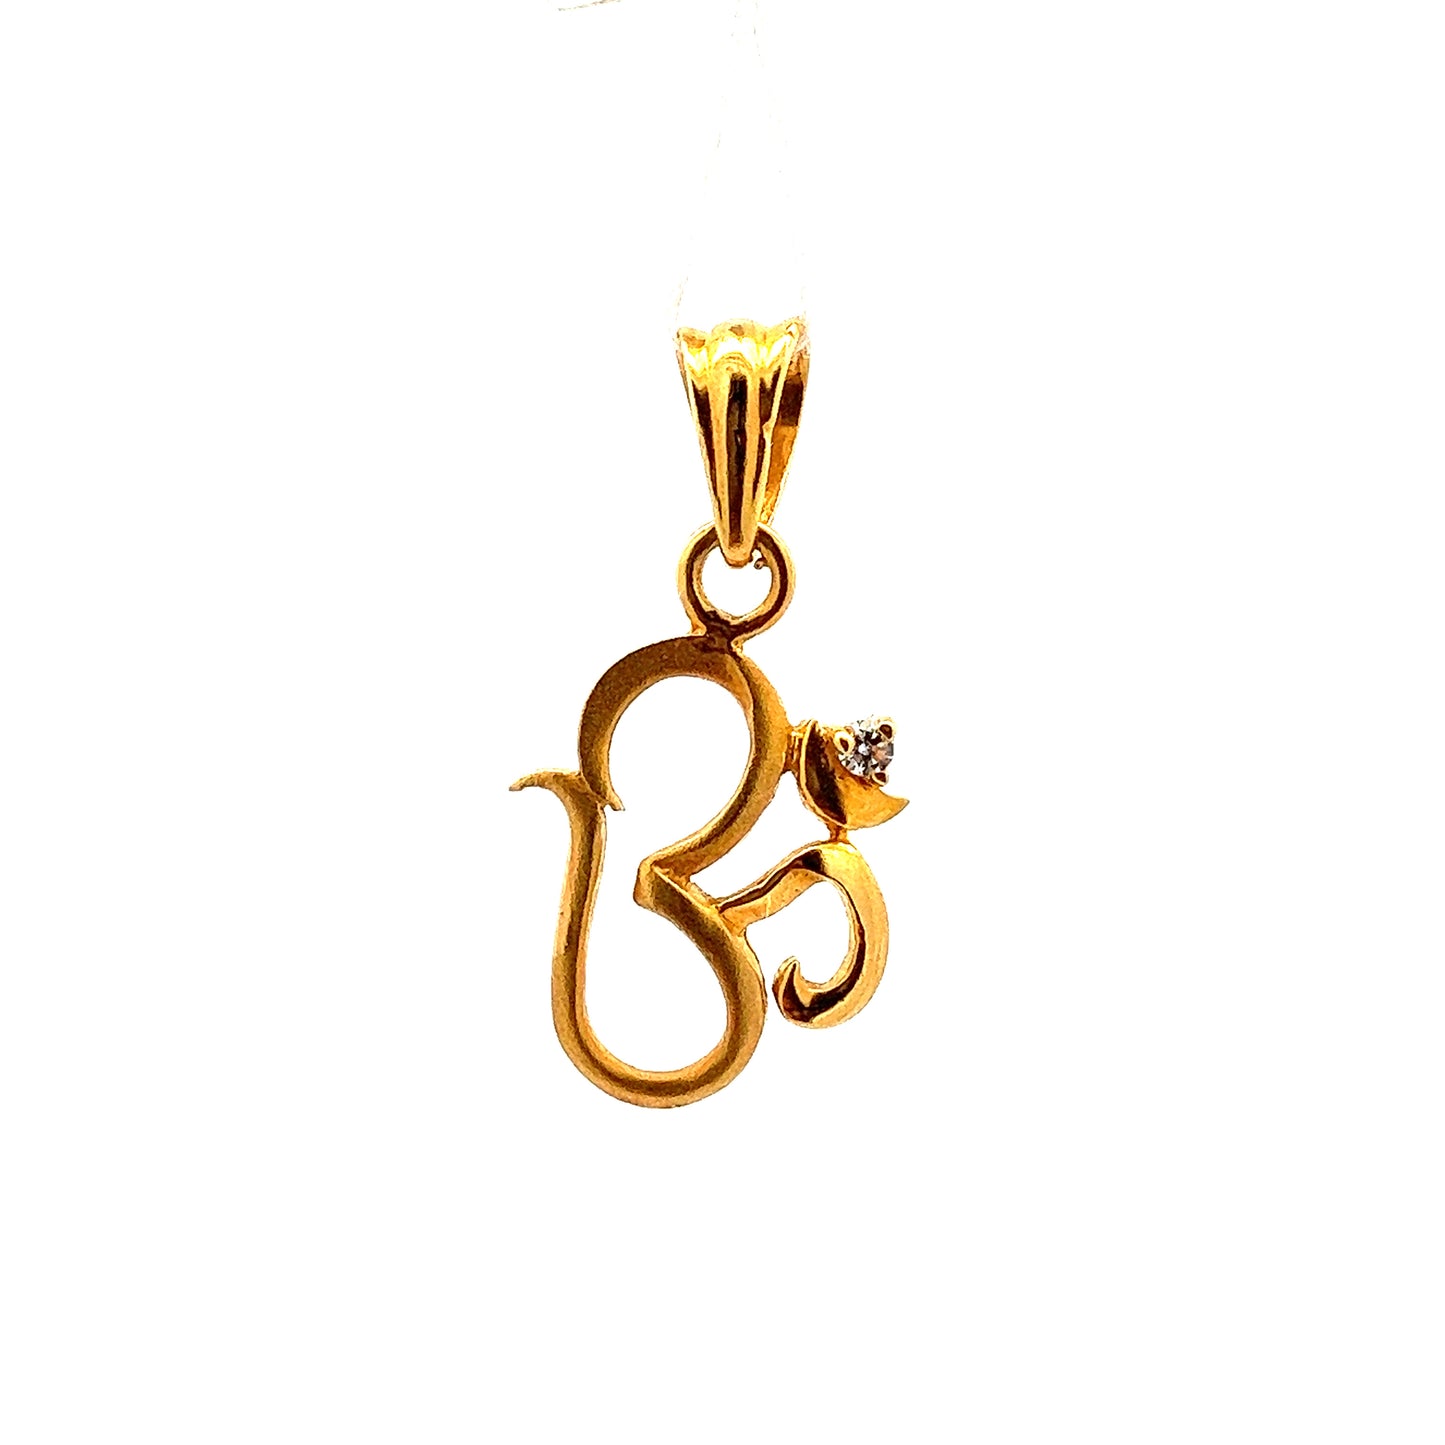 GOLD STONE PENDANT ( 22K ) ( 2.02g ) - 0004394 Chain sold separately